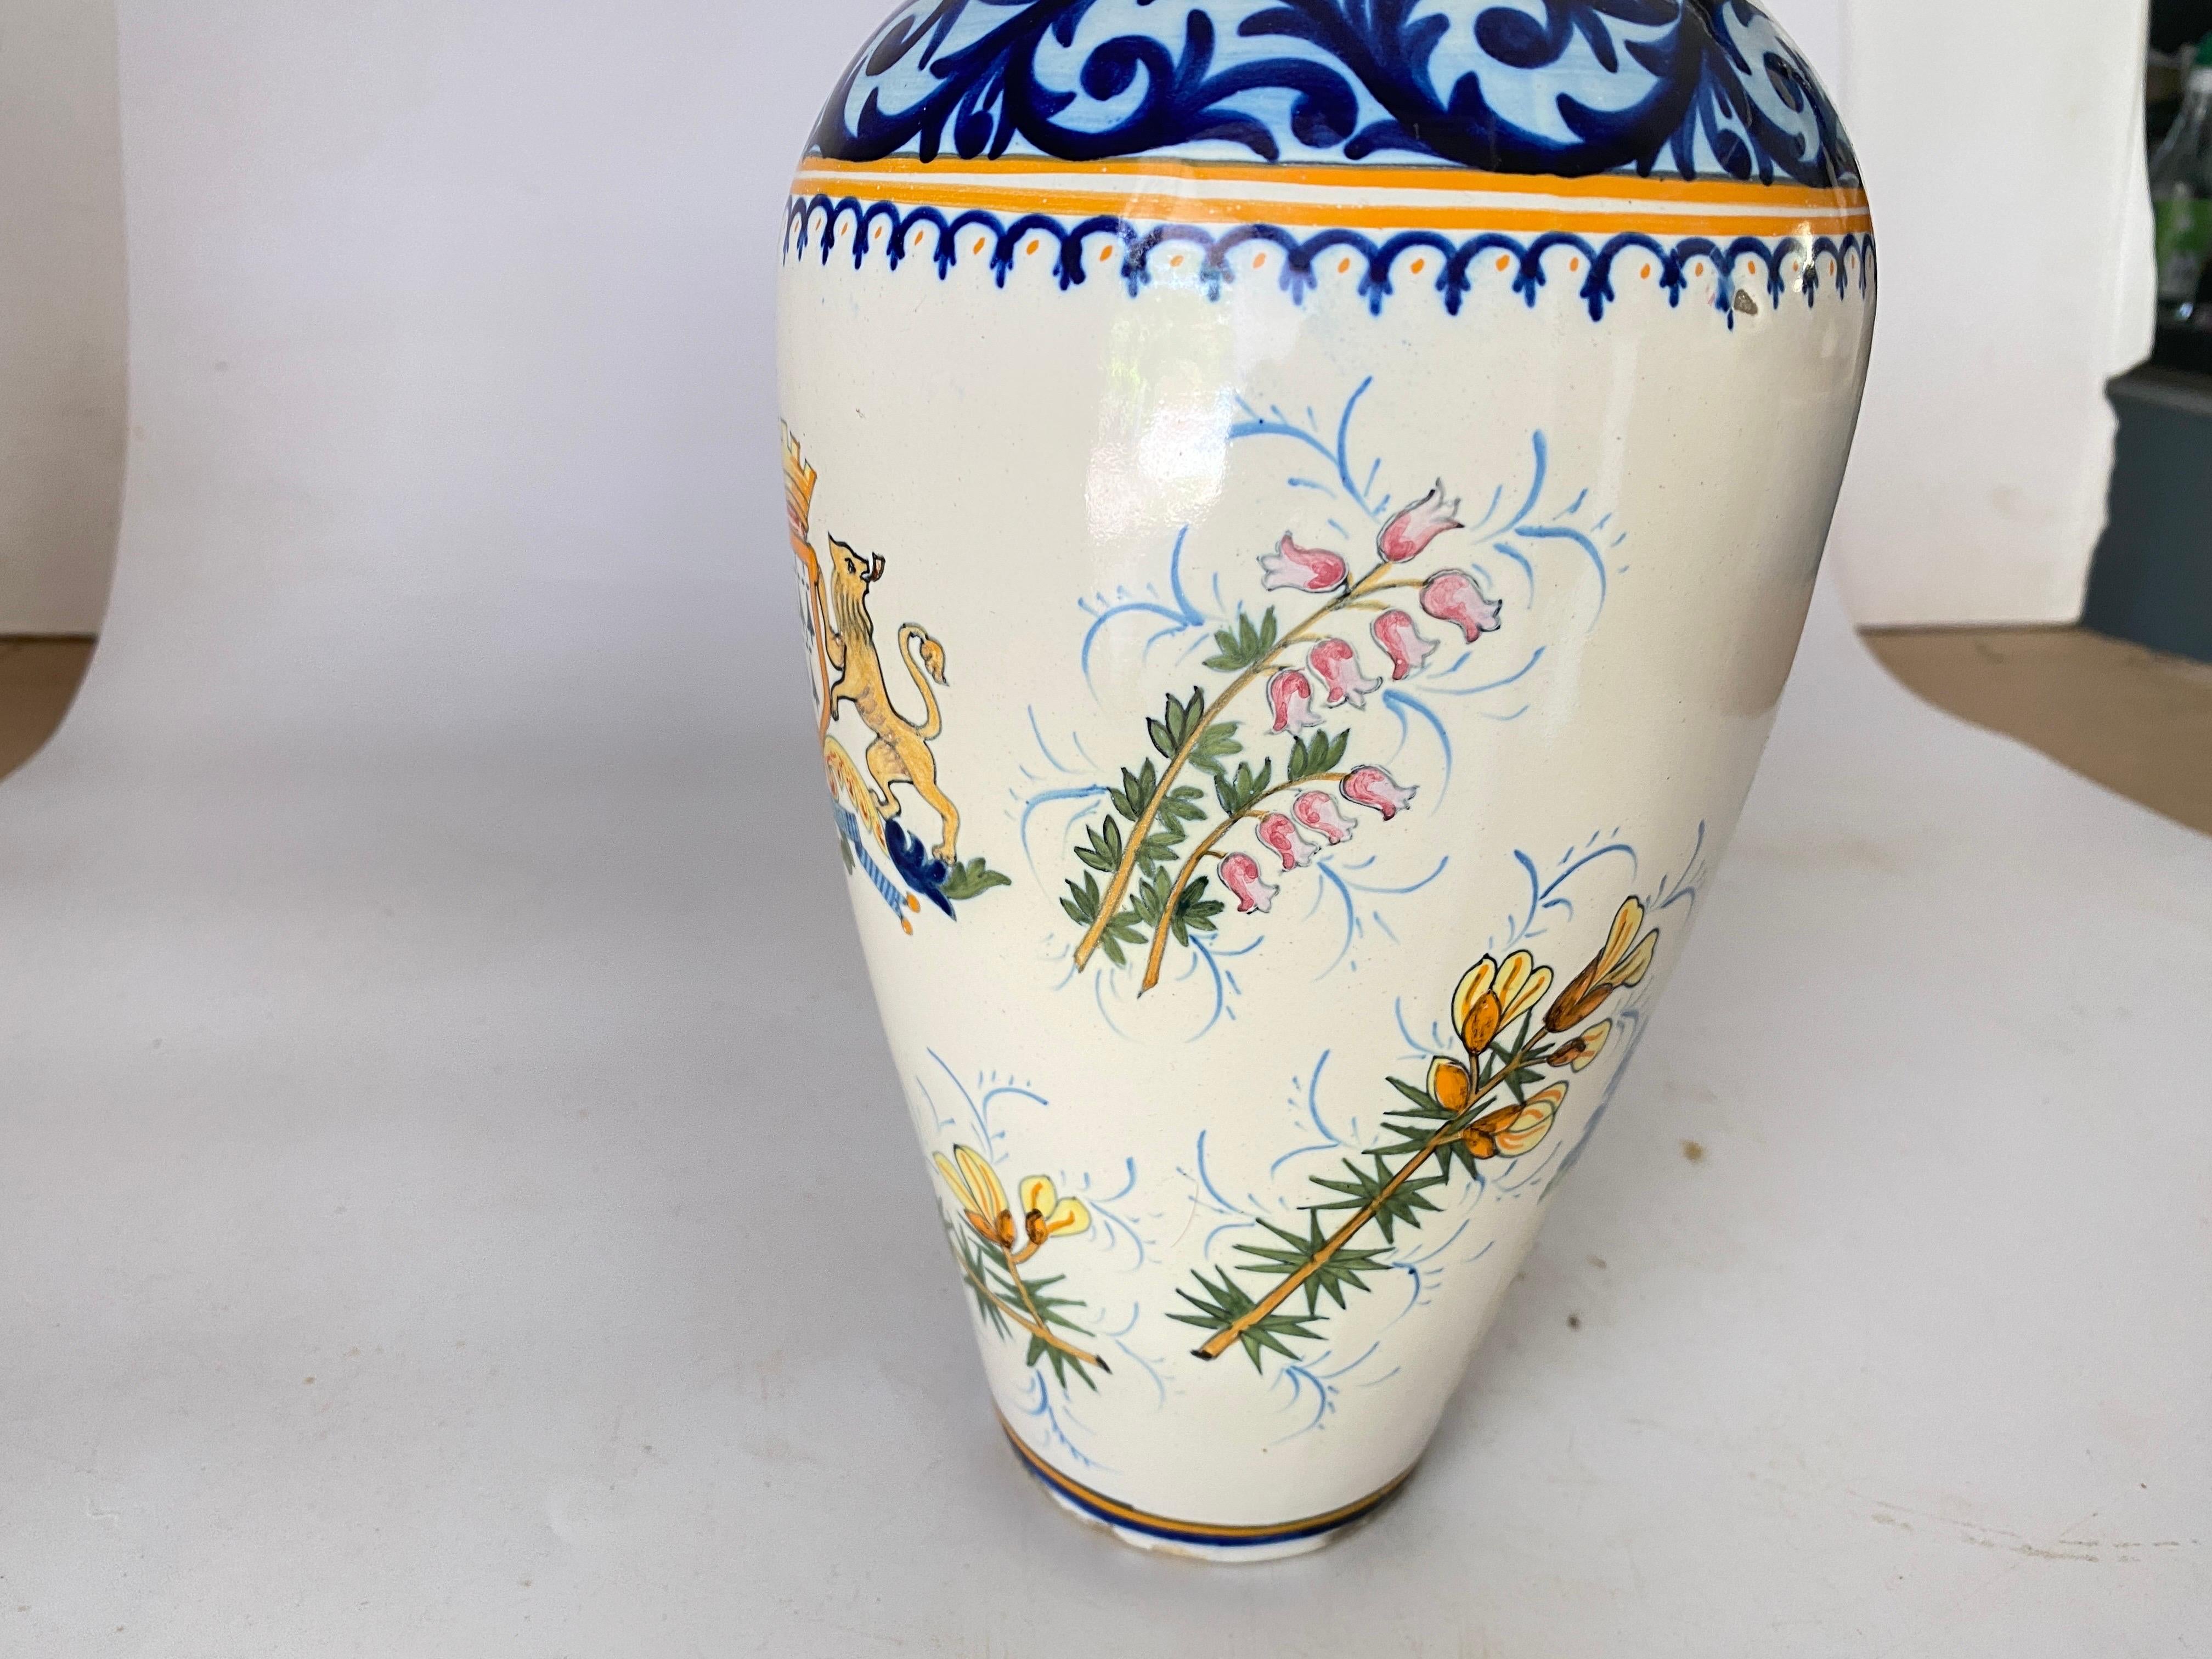 French Provincial 19th Century French Hand-Painted Faience Vase Signed Henriot Quimper For Sale